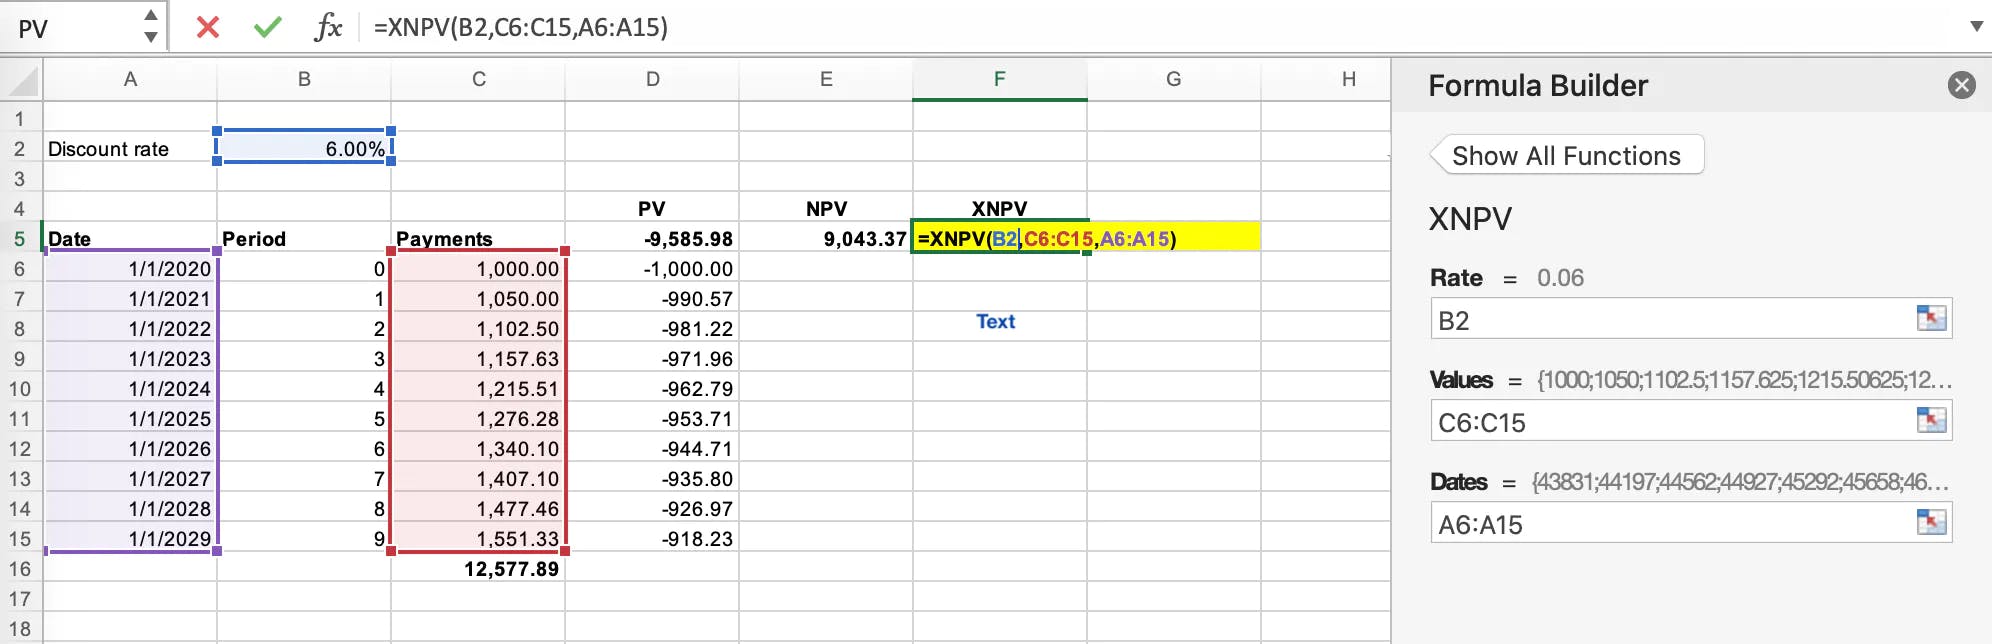 Application of the XNPV formula in Microsoft Excel